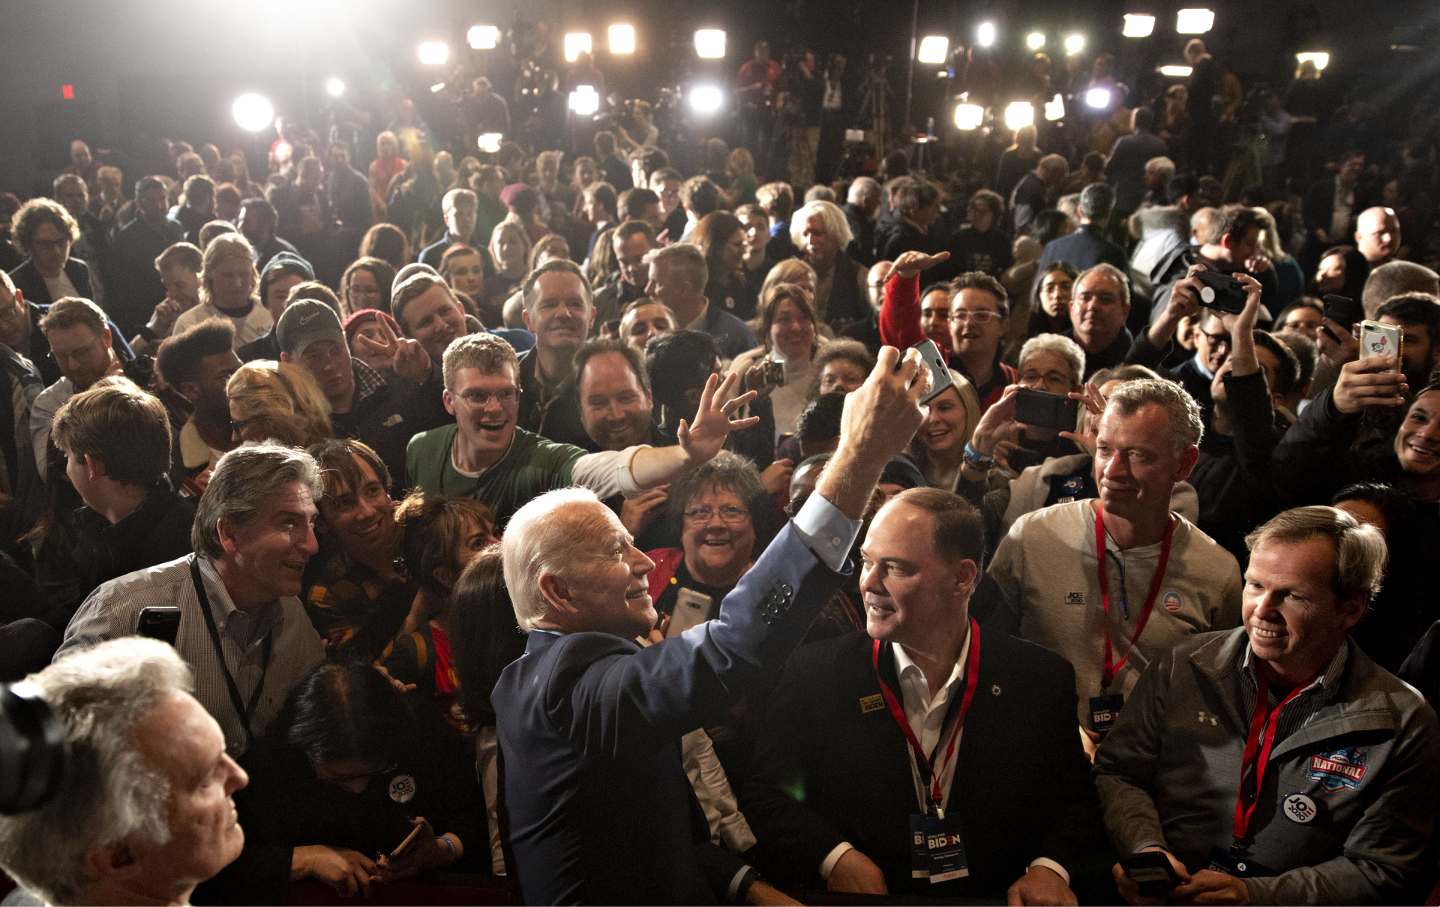 Joe Biden, 2020 Democratic presidential candidate, center, takes a 'selfie' photograph with supporters during a caucus night watch party in Des Moines, Iowa, U.S. on Monday, Feb. 3, 2020.